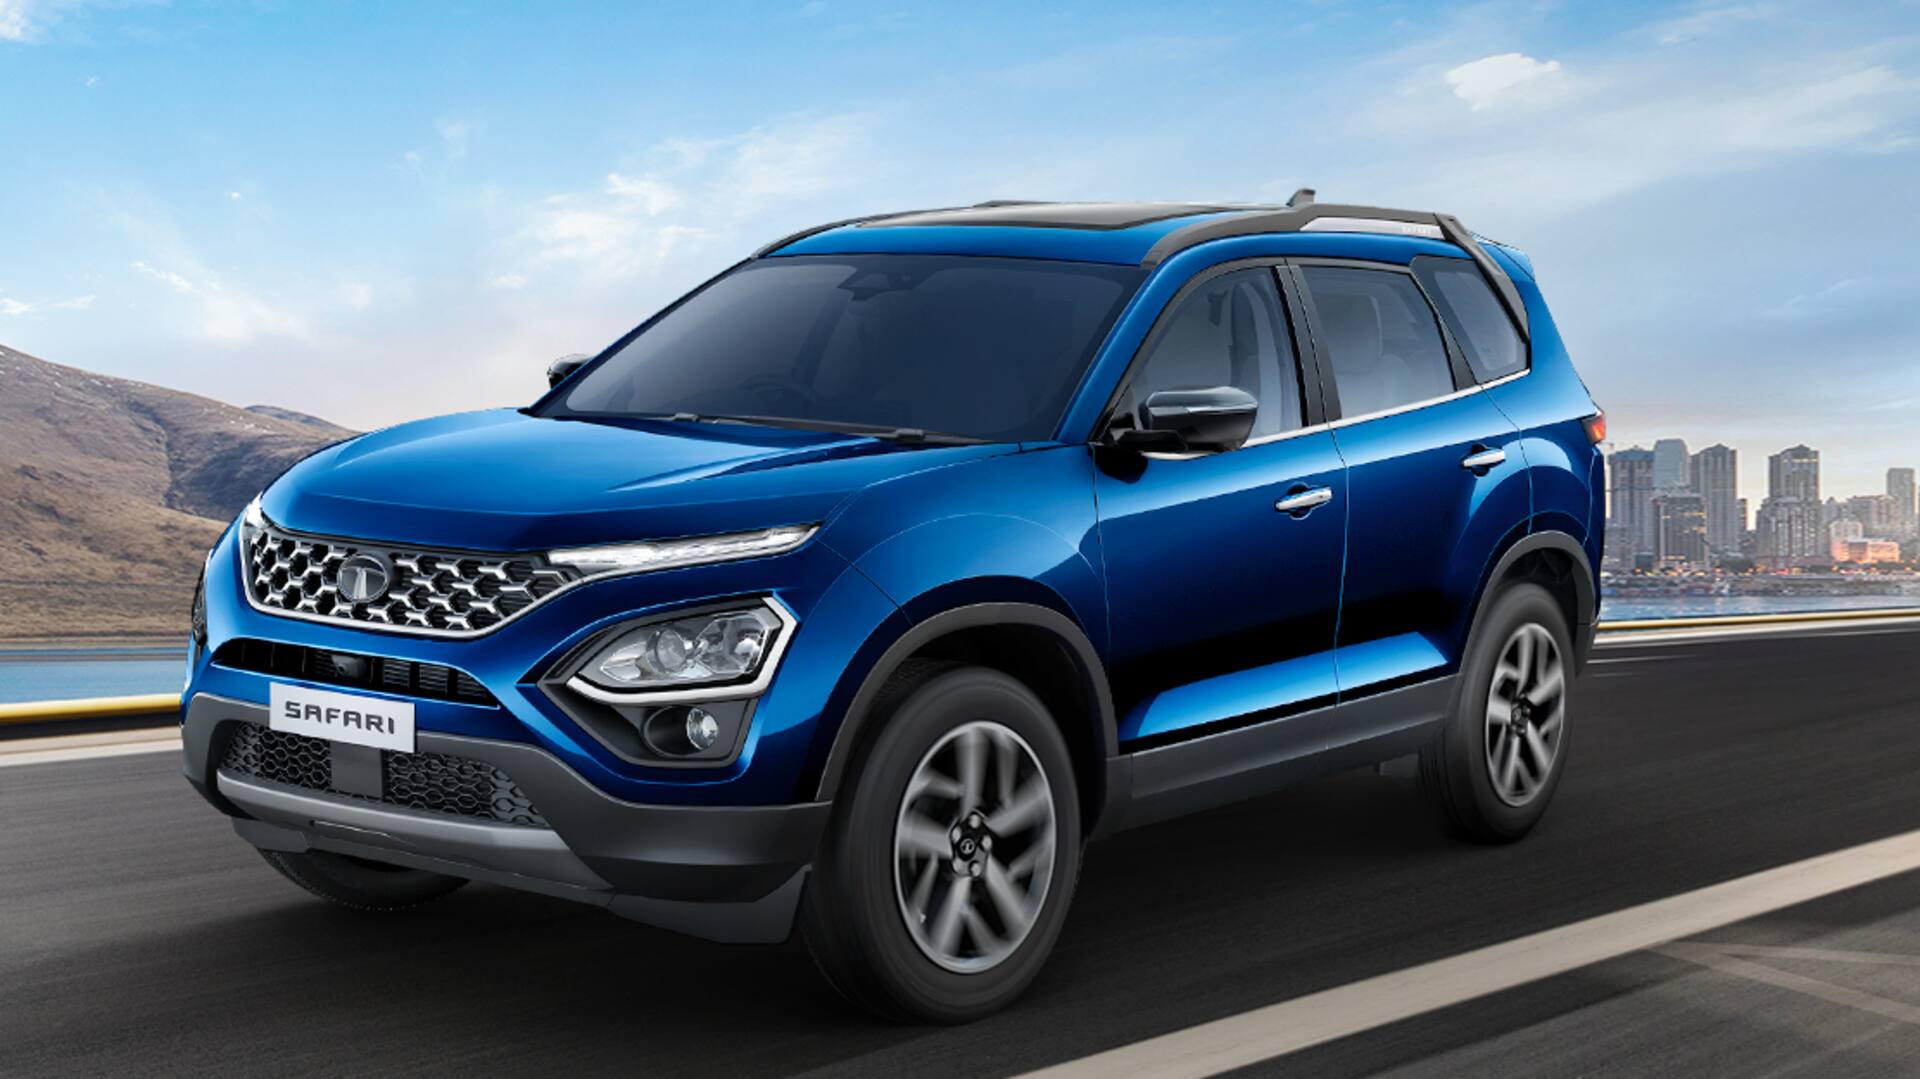 2023 Tata Harrier and Safari revealed with ADAS functions